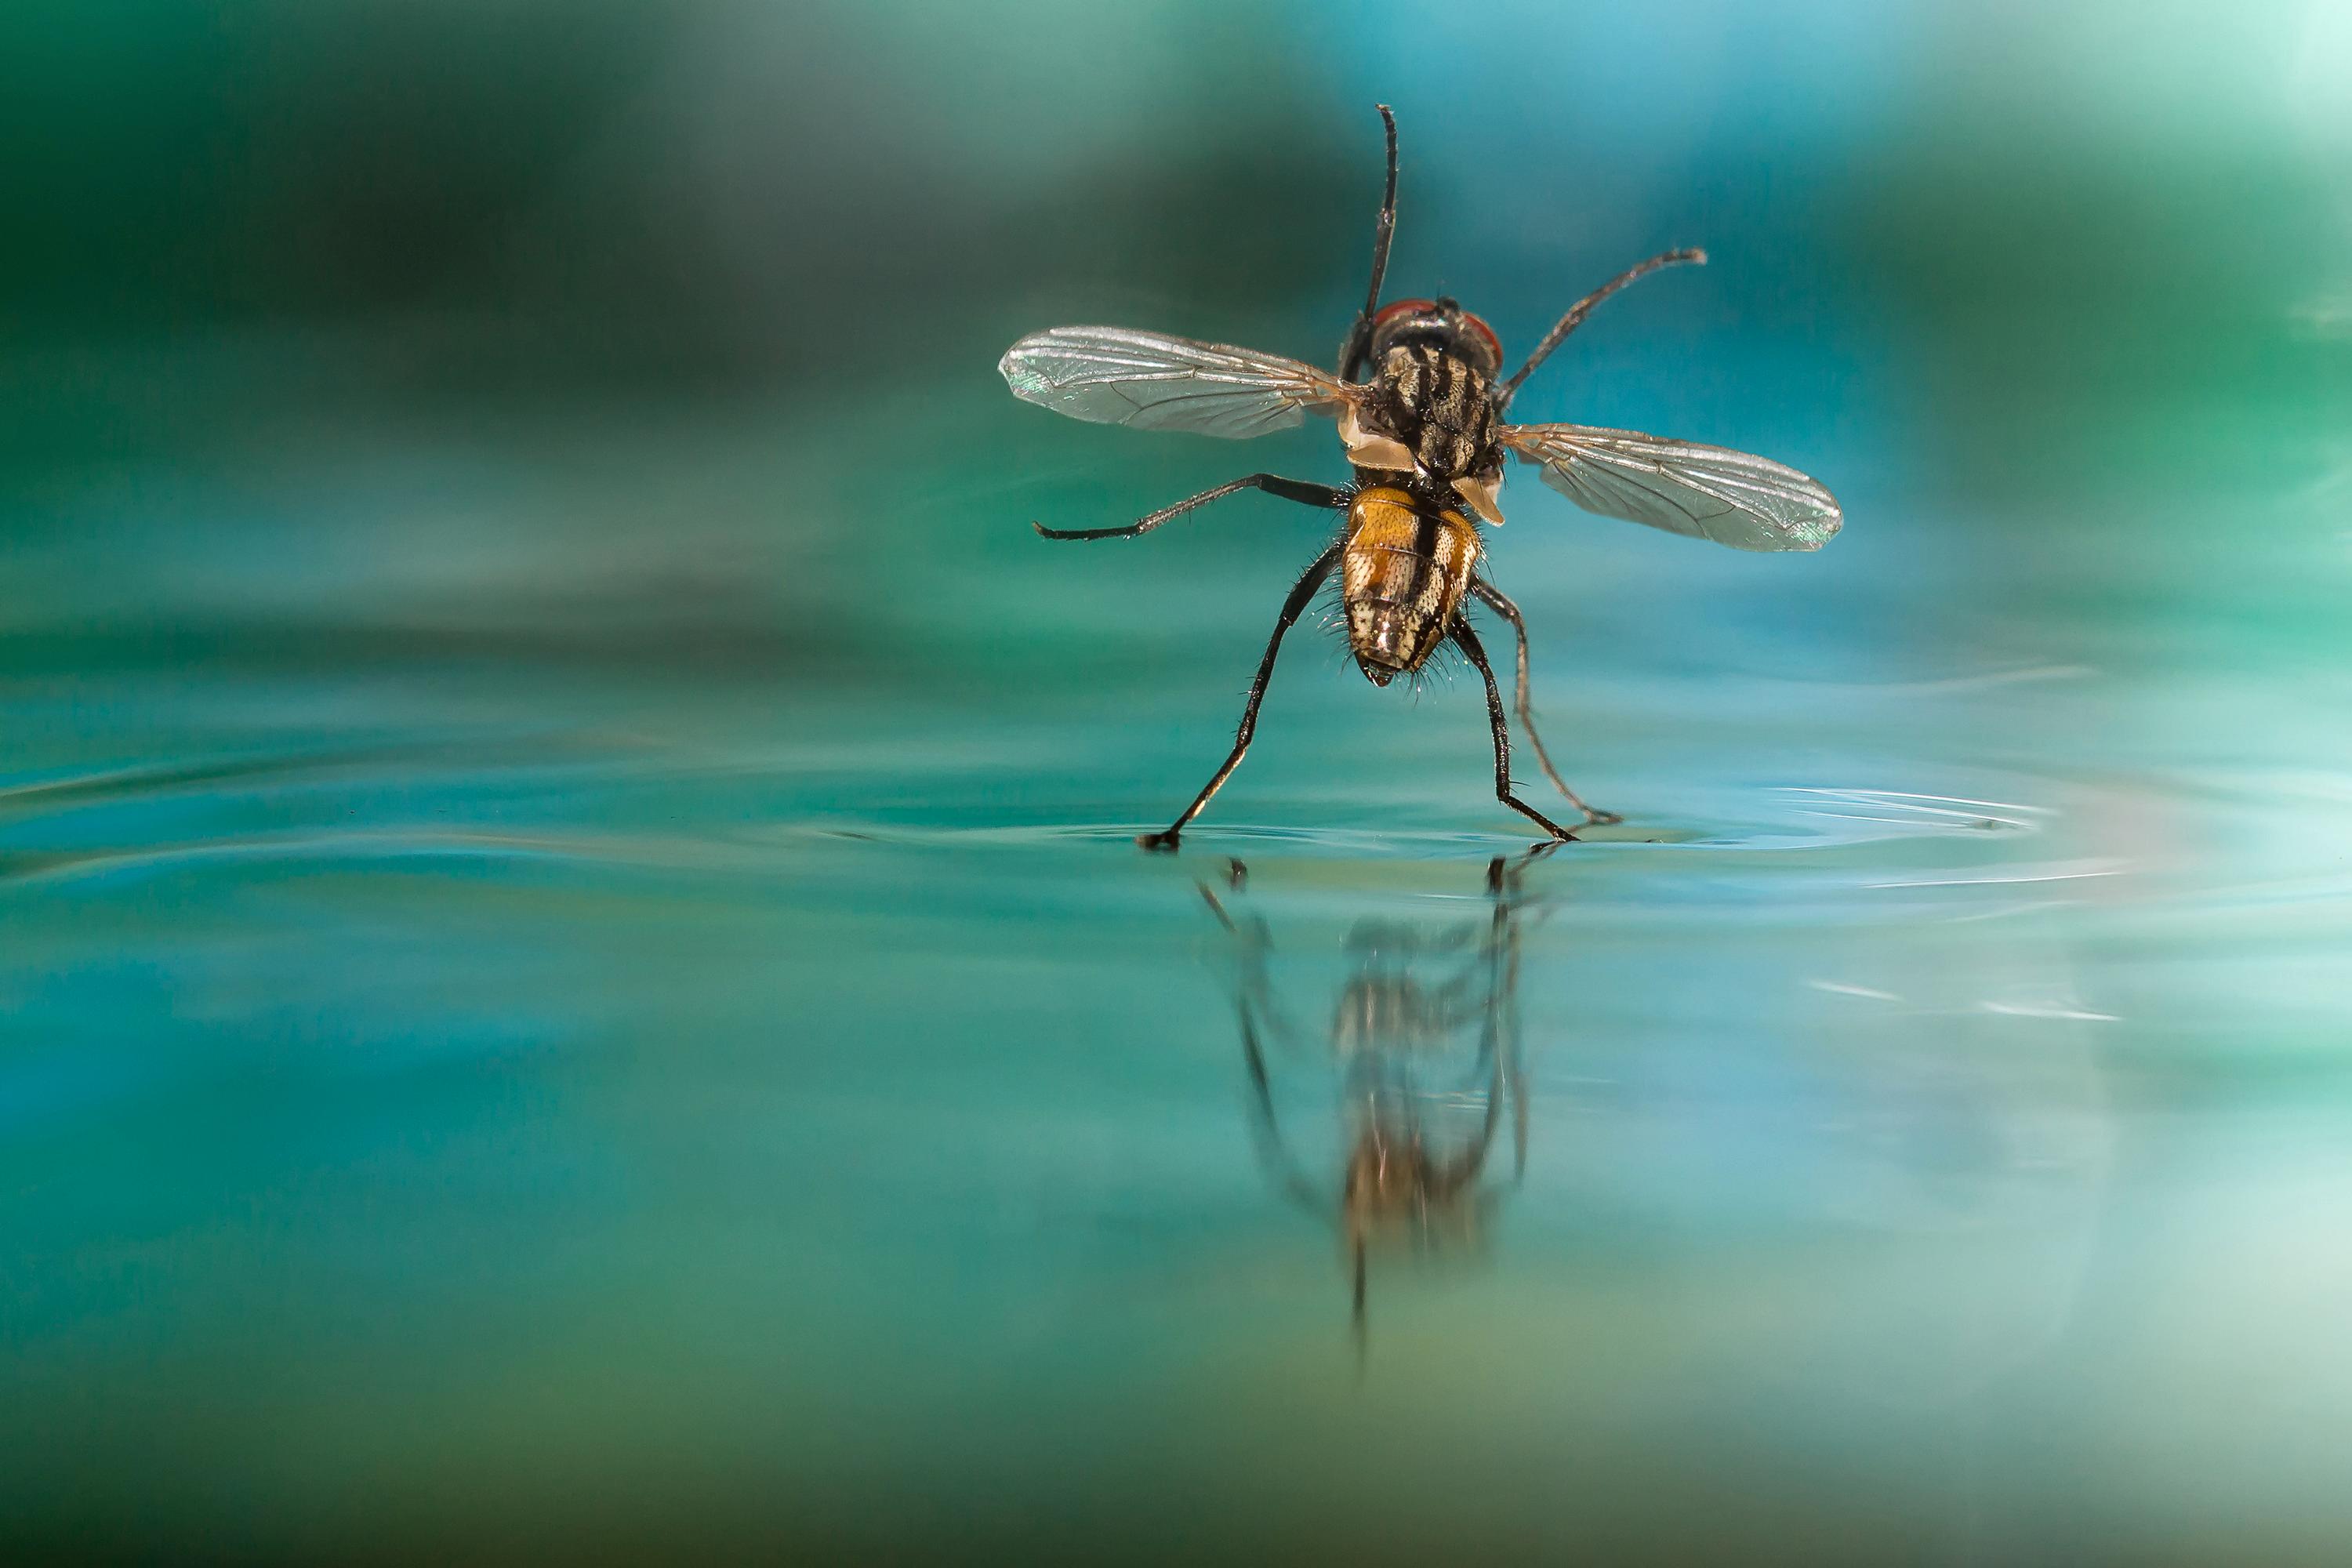 Fly at the start of the water surface gets triggered as it were in the right second. Foto: Uwe Hennig, Germany, Shortlist, Split Second, Open, 2015 Sony World Photography Awards